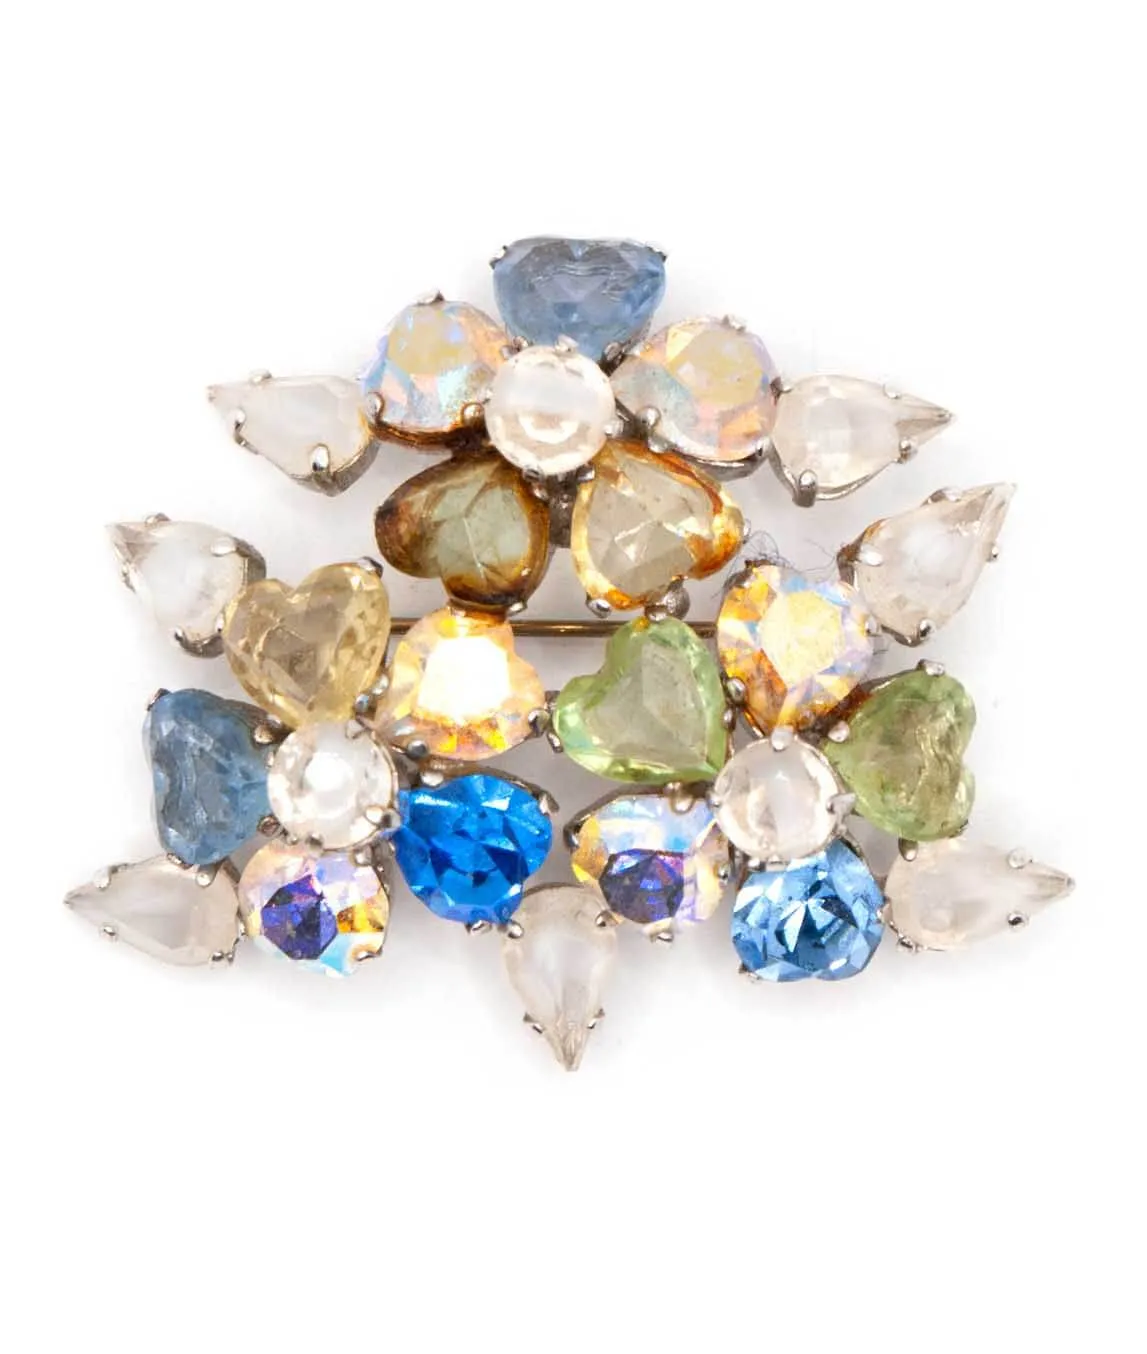 Top view of Christian Dior flower brooch composed of heart shaped crystals 